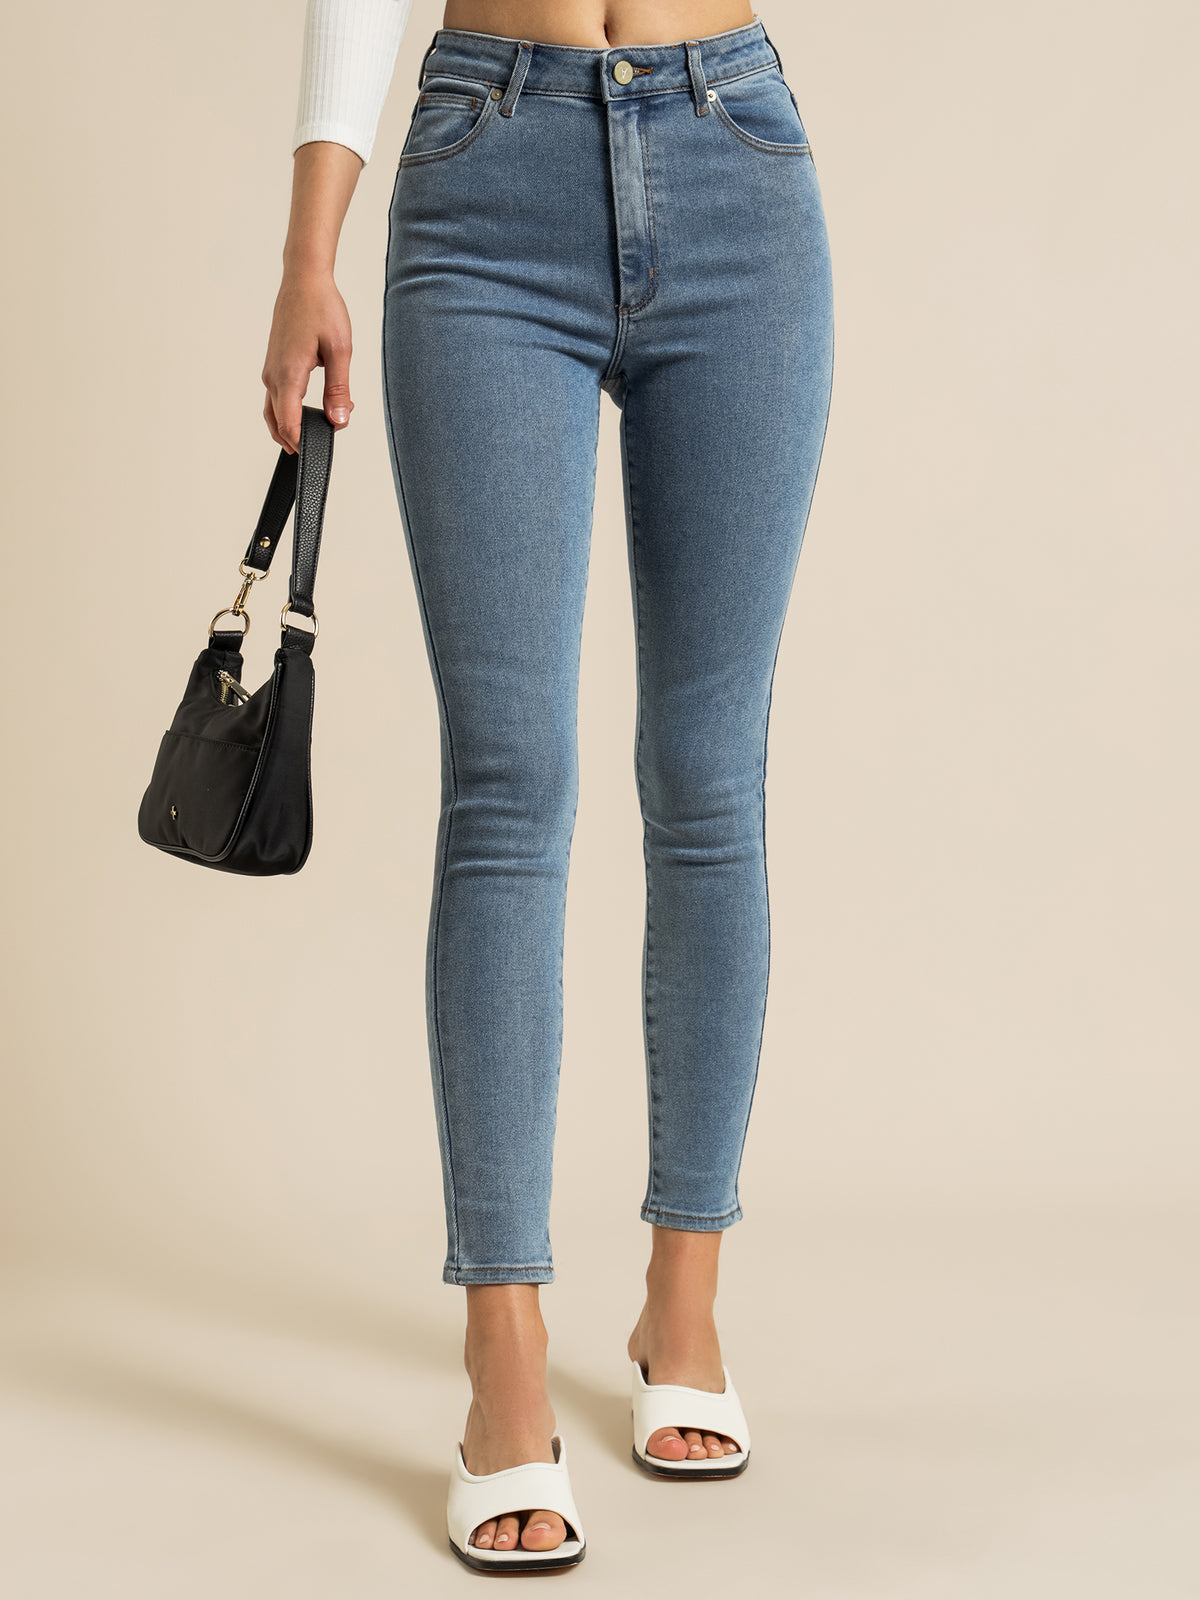 A High Skinny Ankle Basher Jeans in LA Blues Denim